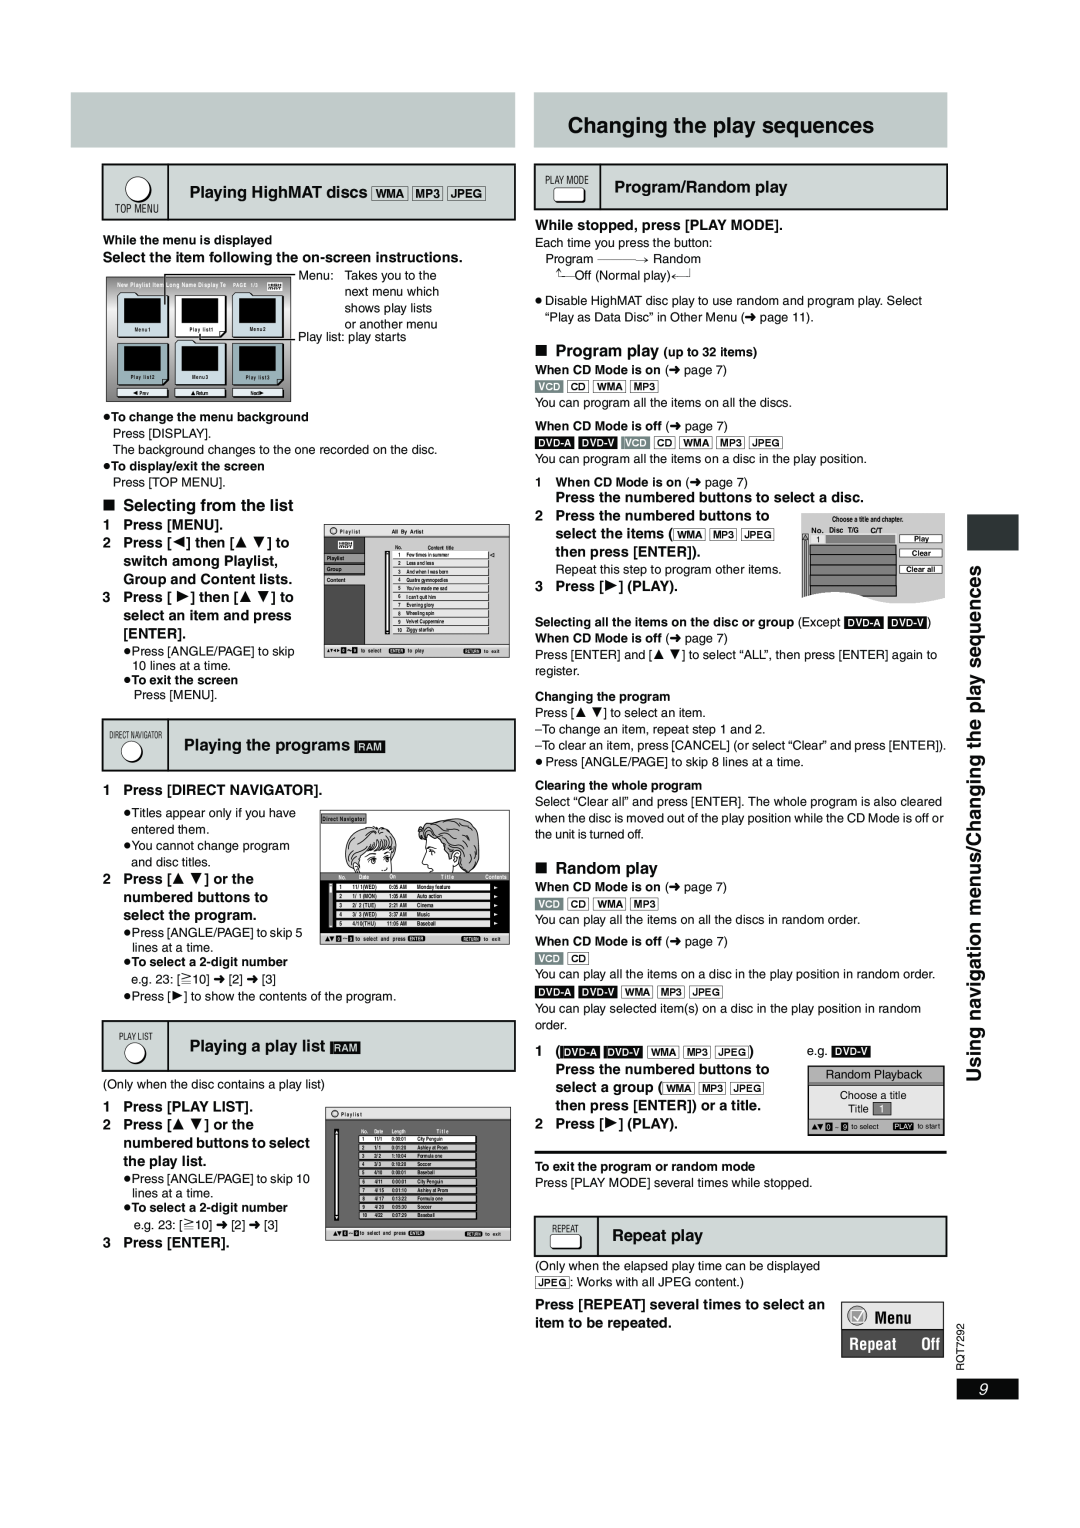 Panasonic DVD-F84 Changing the play sequences, menus/Changing, navigation, Using, then press ENTER or a title 